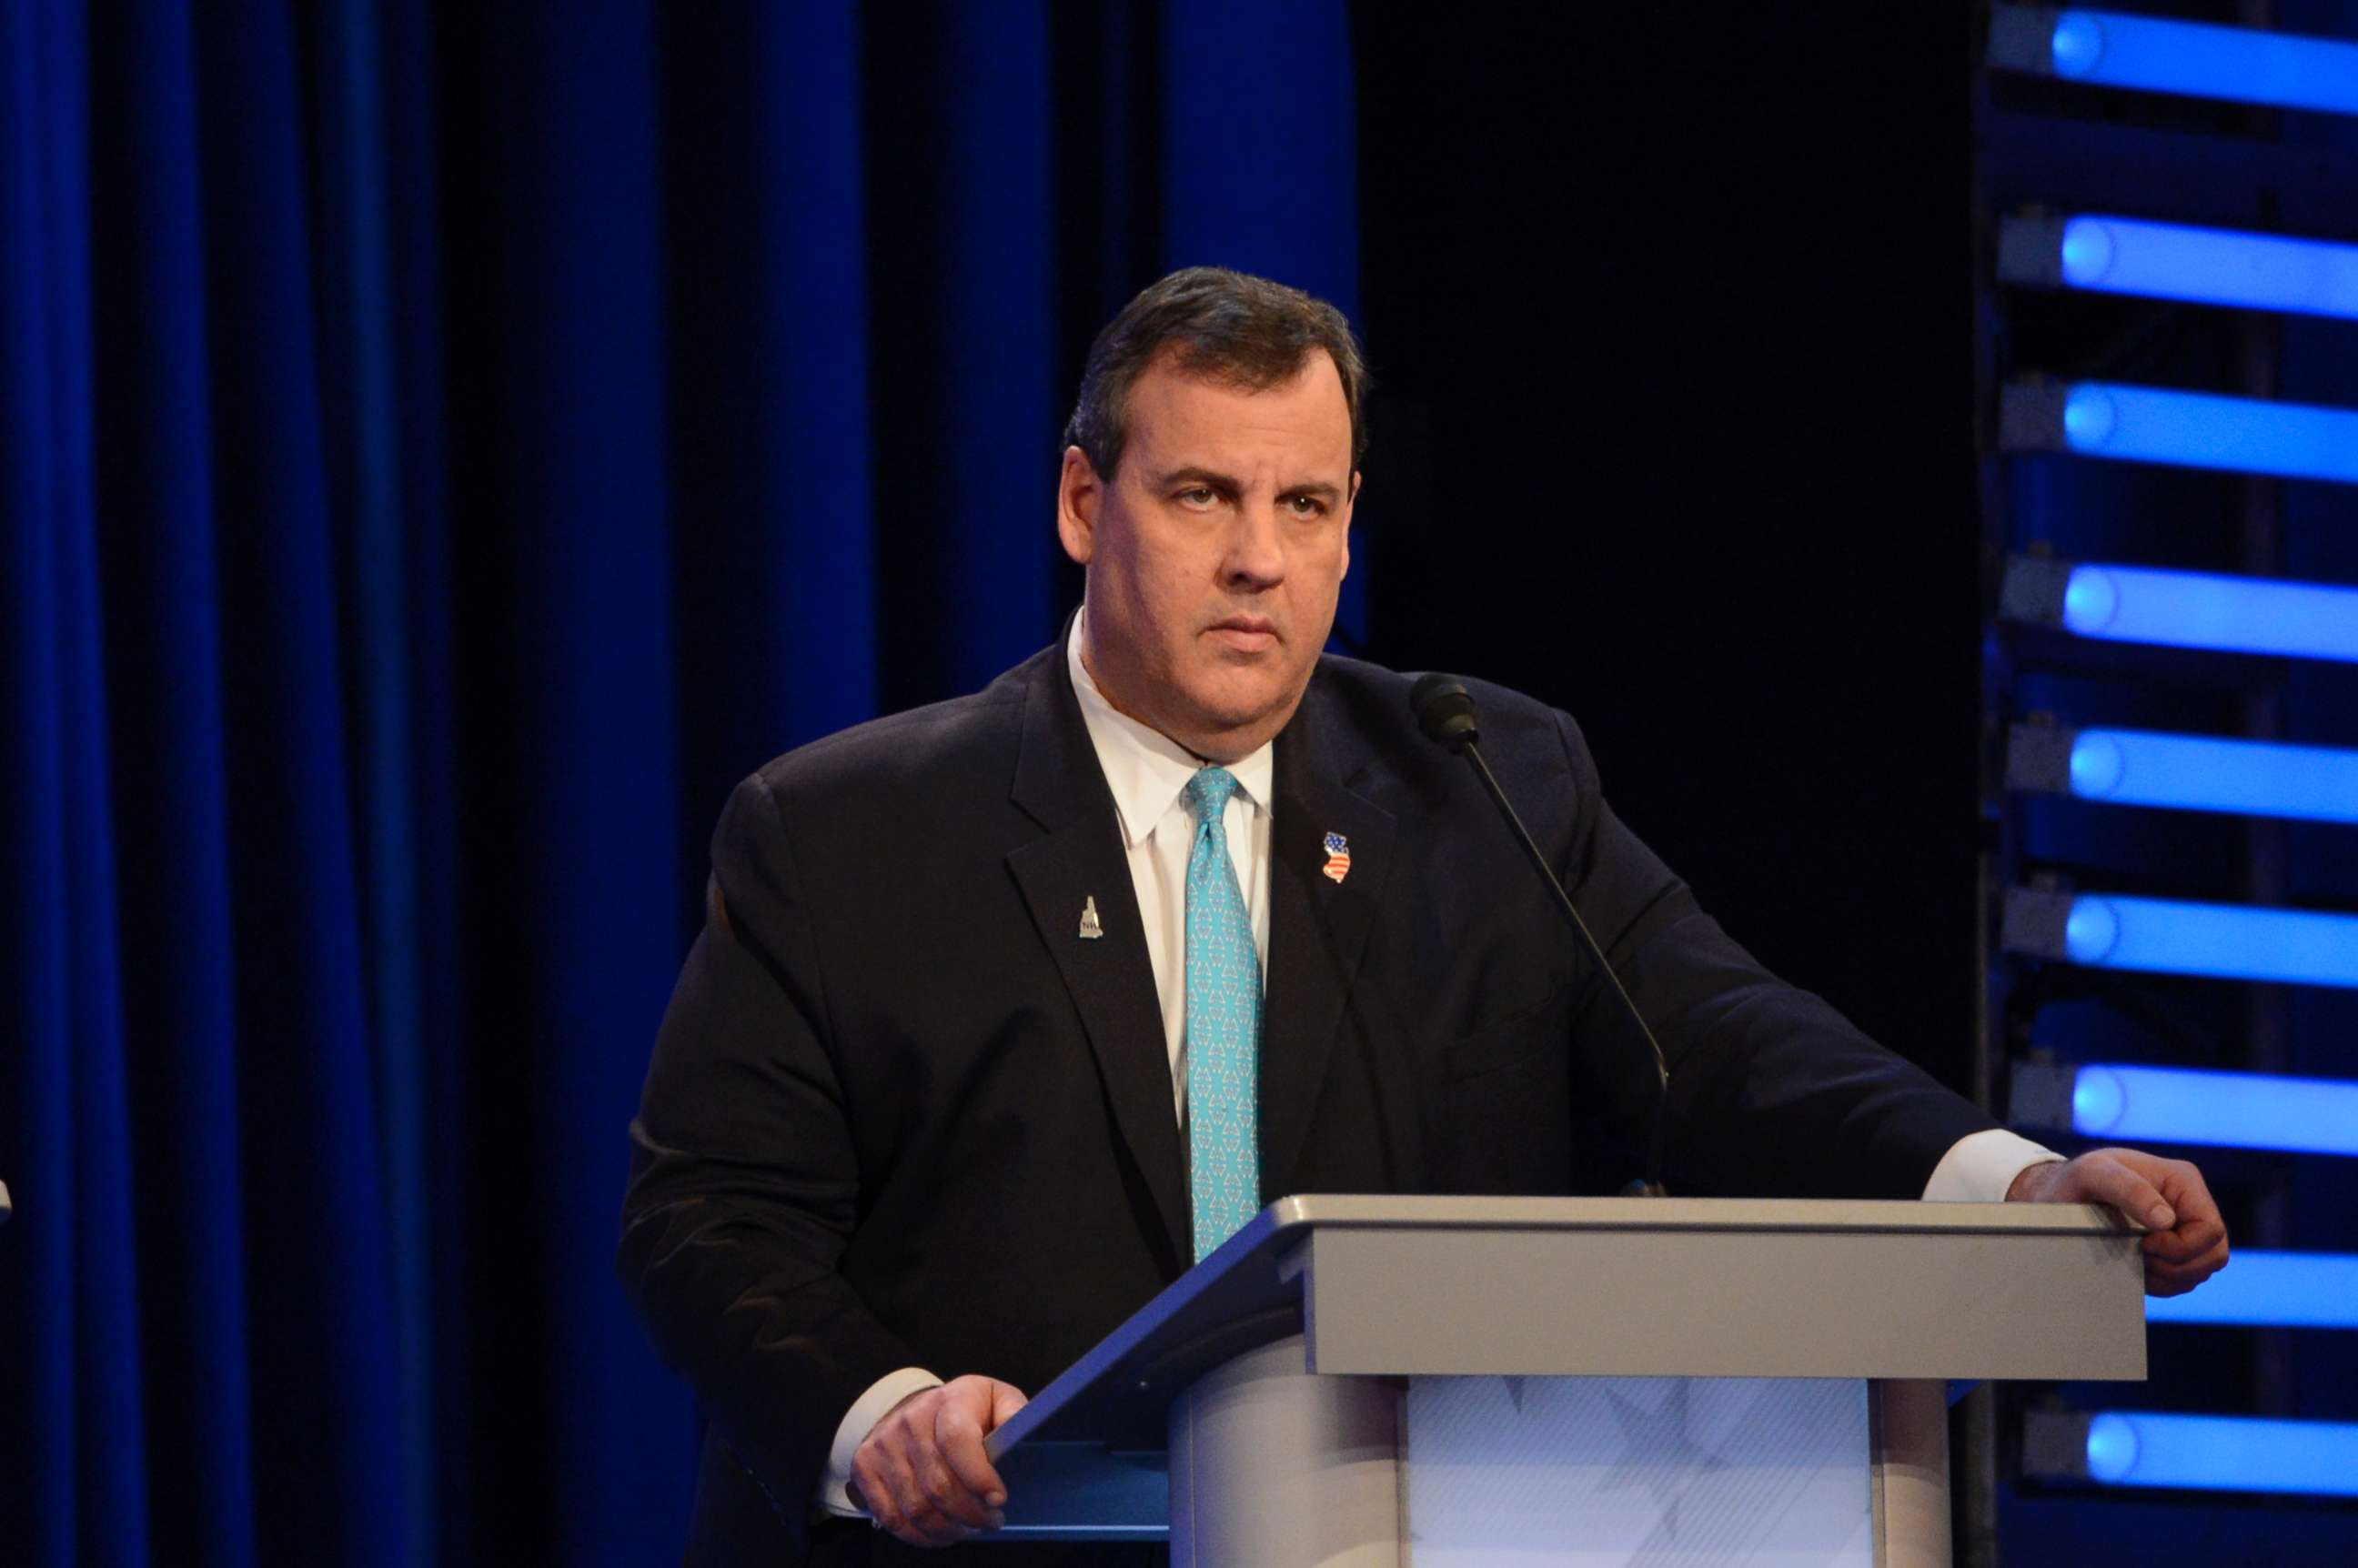 PHOTO: New Jersey Gov. Chris Christie at the Republican Debate from St. Anselm College in Manchester, N.H., Feb. 6, 2016.